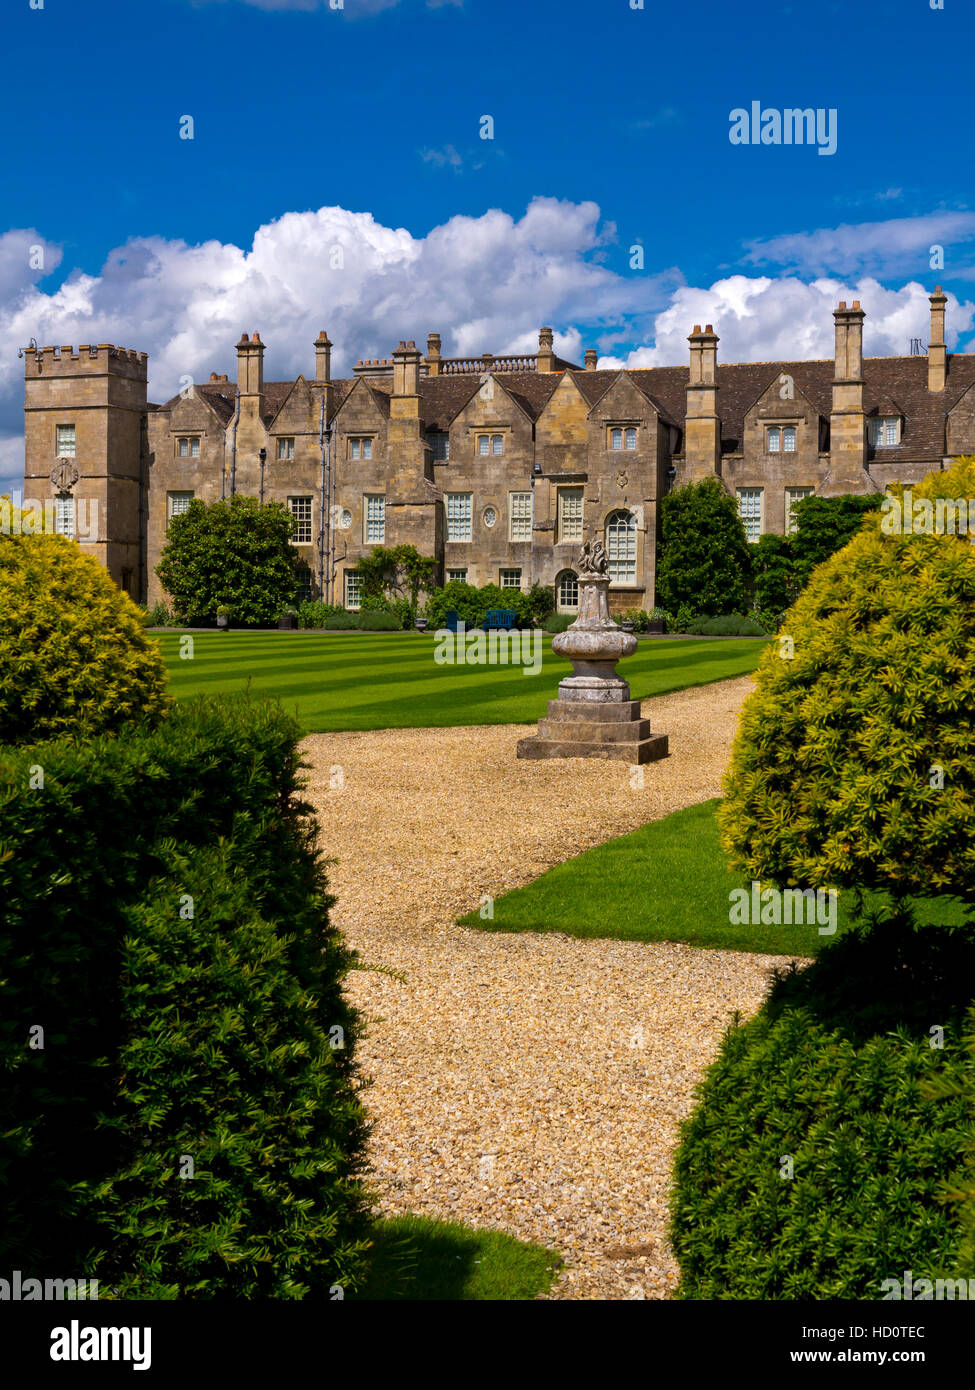 Grimsthorpe Castle in Lincolnshire England UK home of the De Eresby family since 1516 Stock Photo